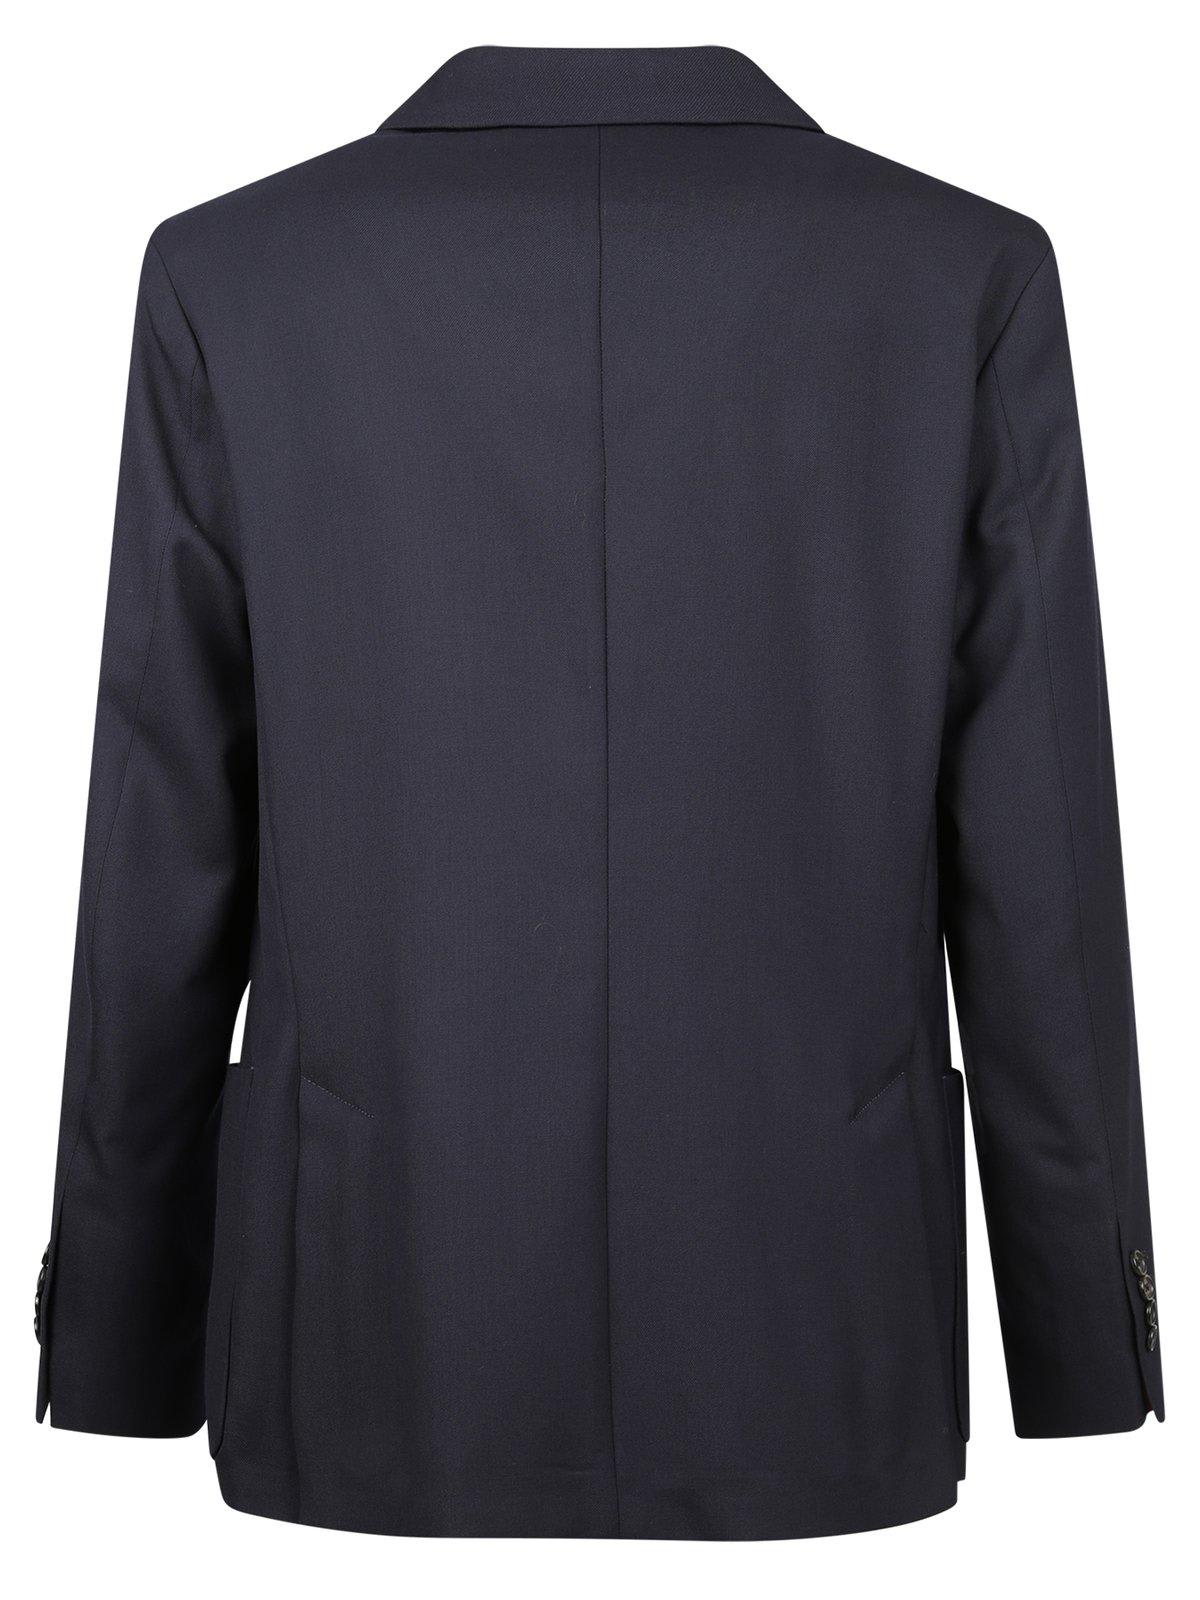 Shop Ps By Paul Smith A Suit To Travel In Unlined Blazer Blazer In Dark Navy